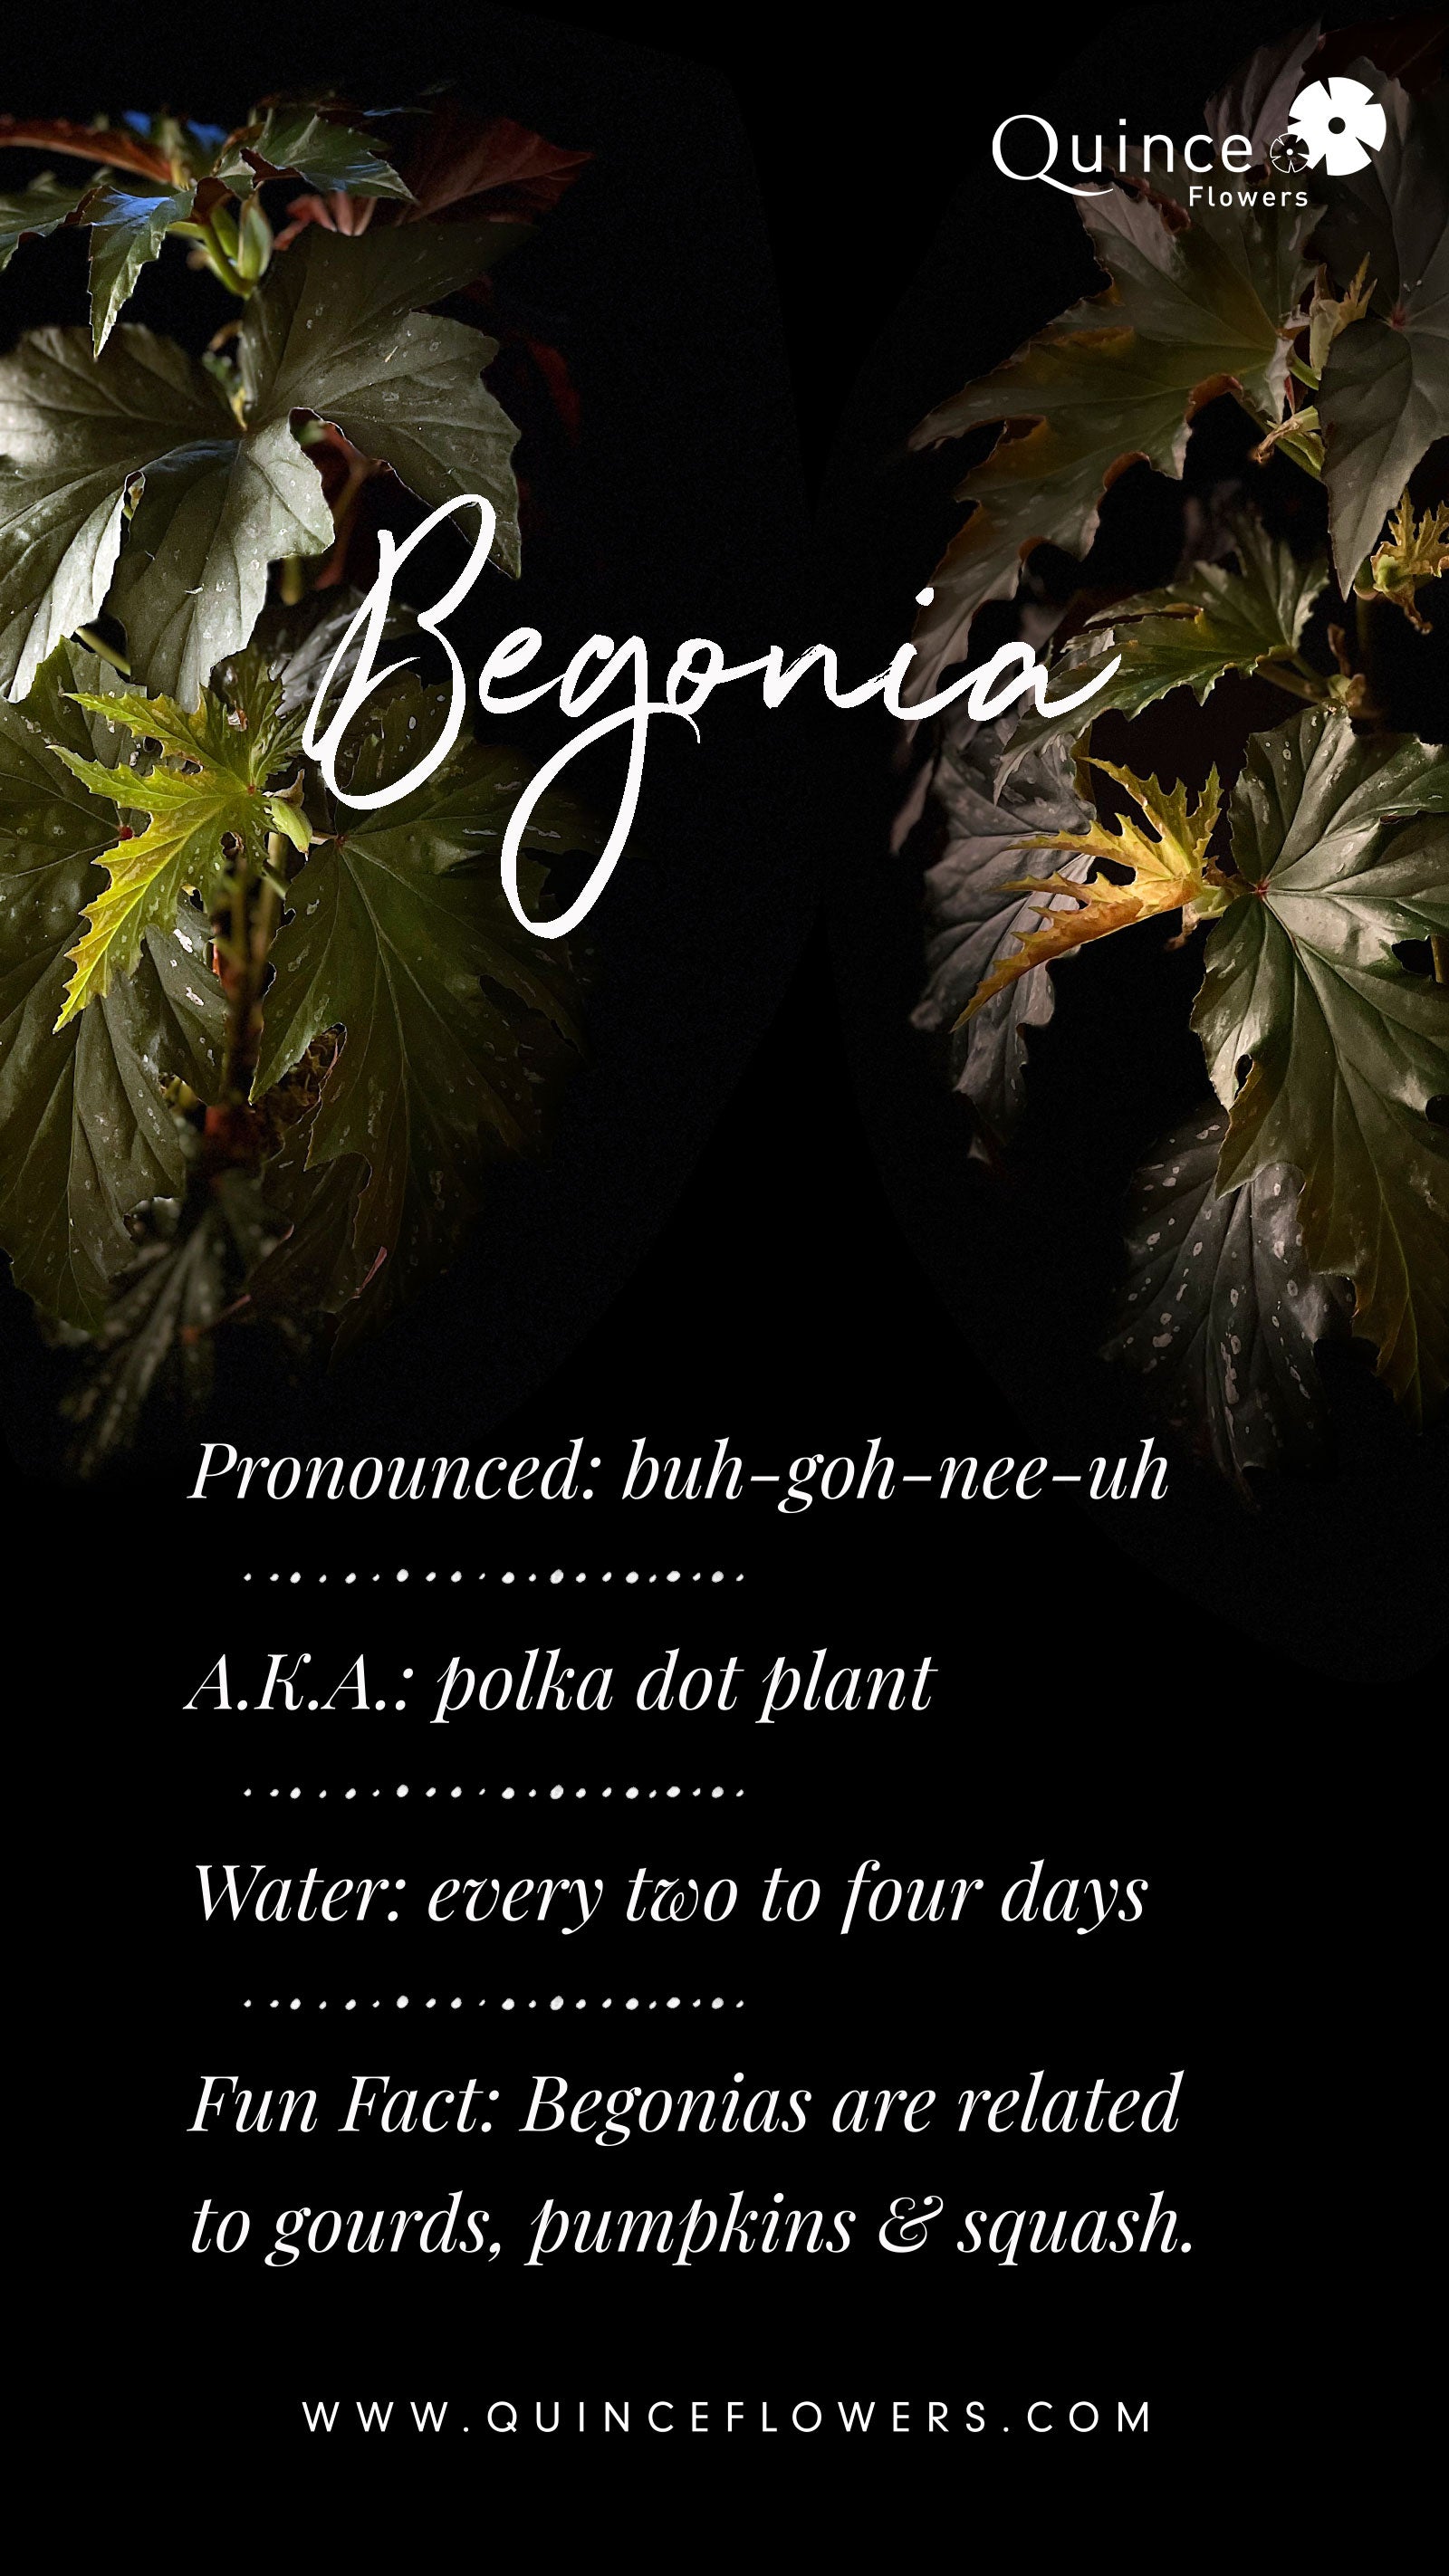 Begonia, a rare variety with striking foliage, available at Quince Flowers. Order online for same-day flower delivery from the best florist in Toronto near you.